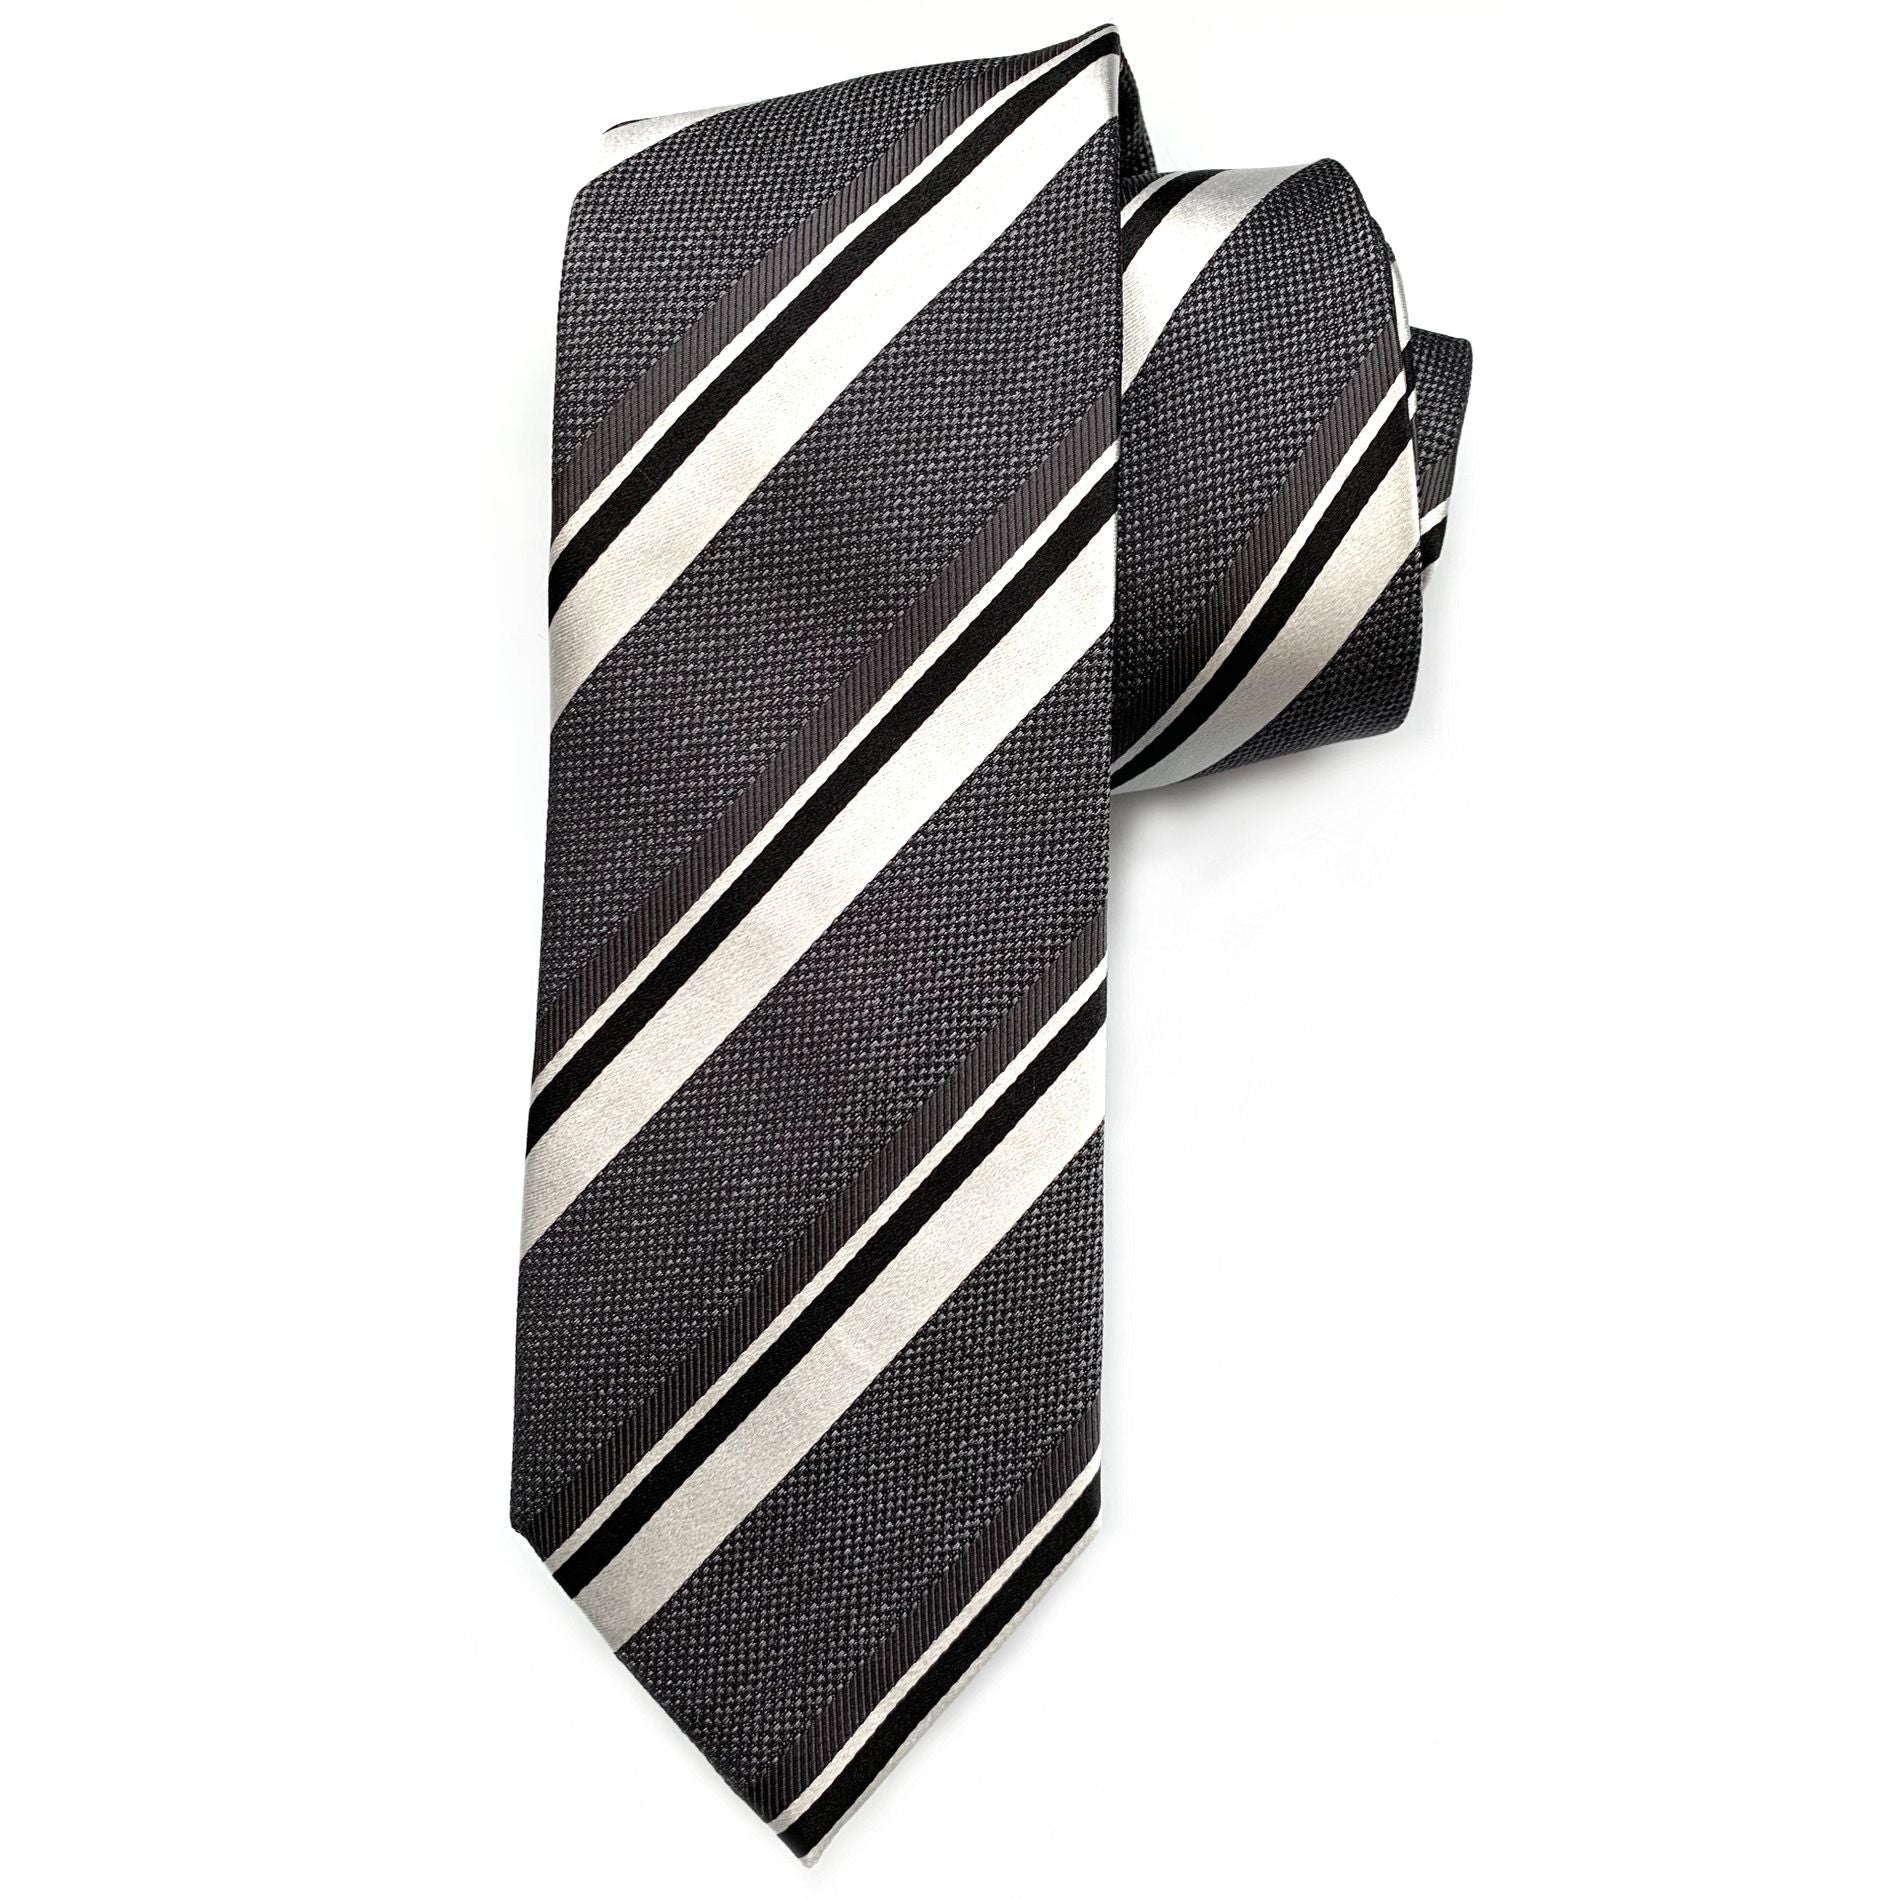 Charcoal and Silver Multi-Textured Stripe Woven Silk Tie by Bruno Marchesi